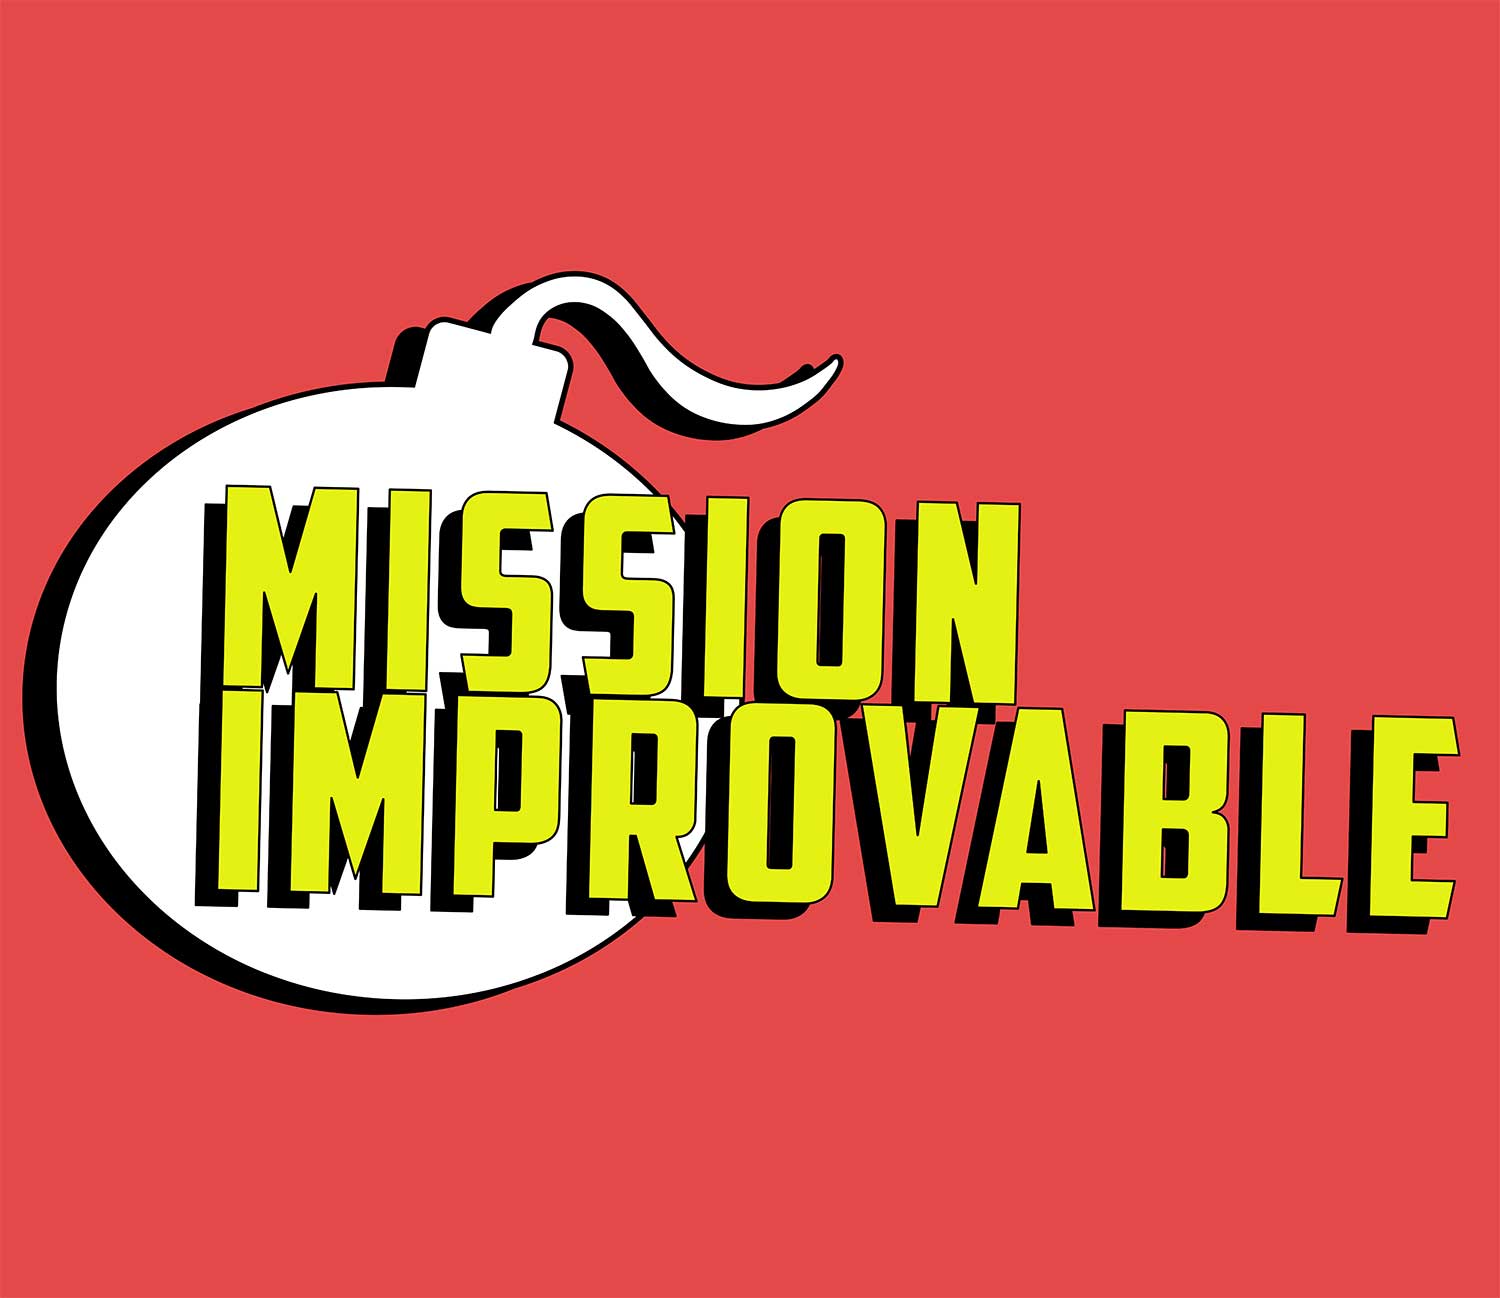 'Mission Improvable' in yellow lettering in front of a white outline of a bomb with a red background.